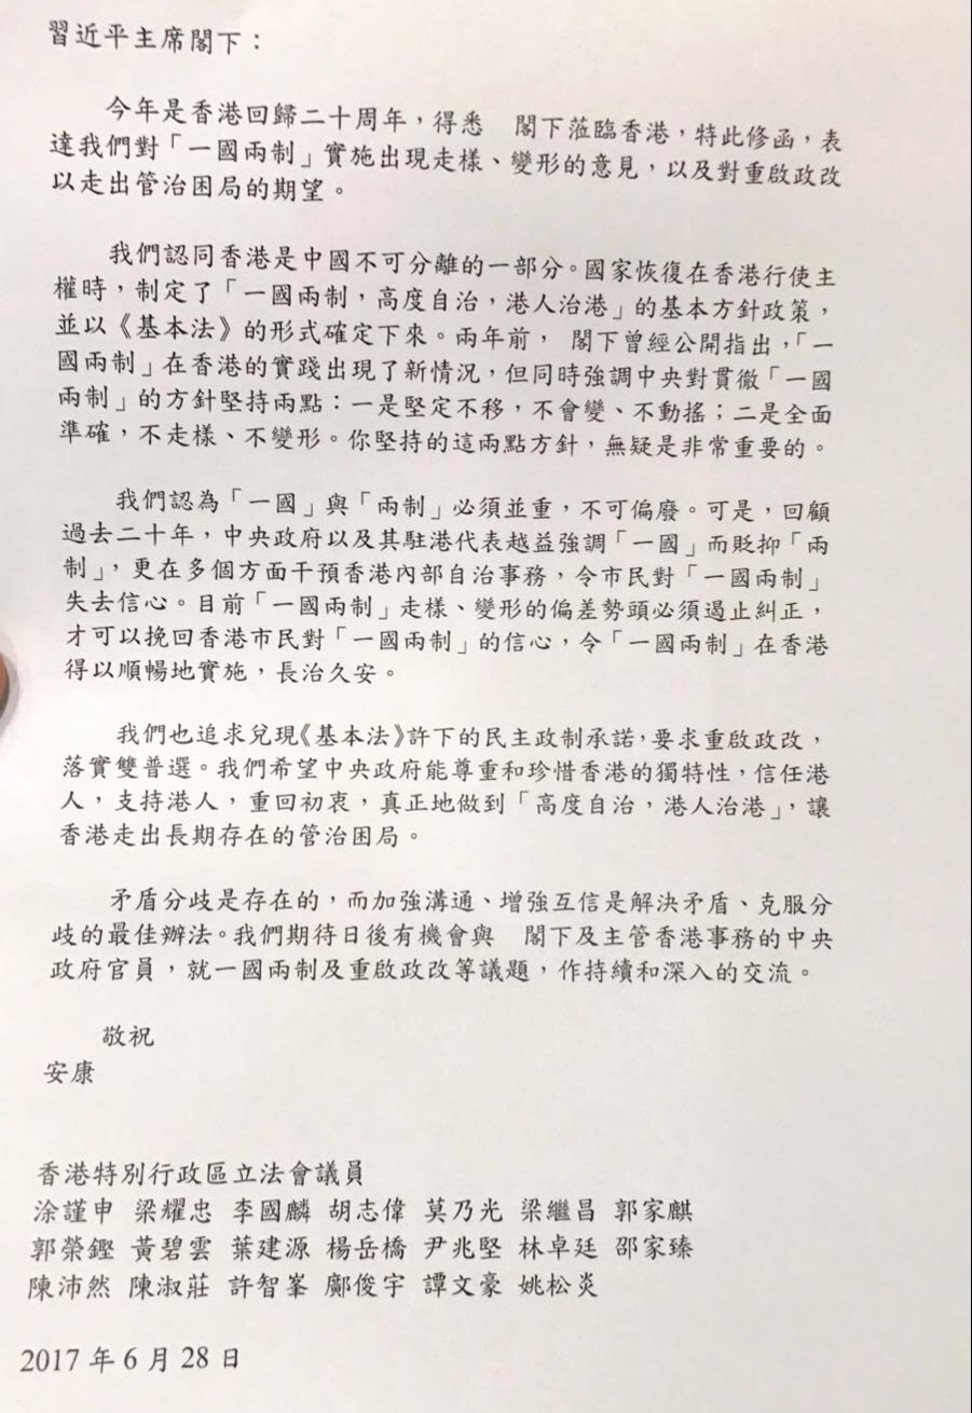 The letter submitted by pan-democrats.